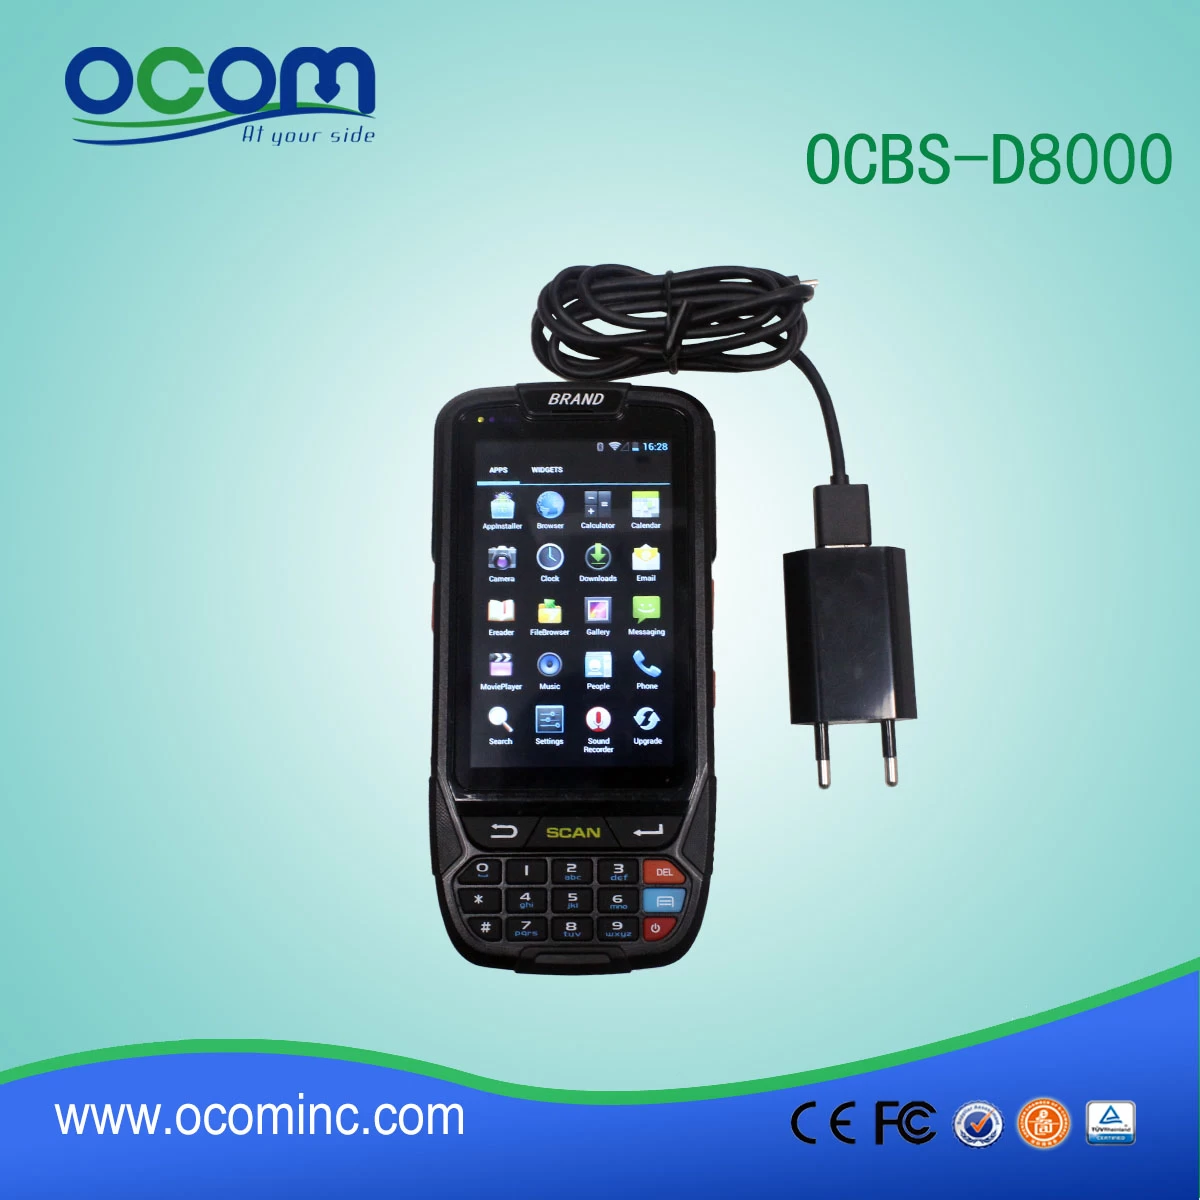 (OCBS-D8000) Android Based Industrial PDA